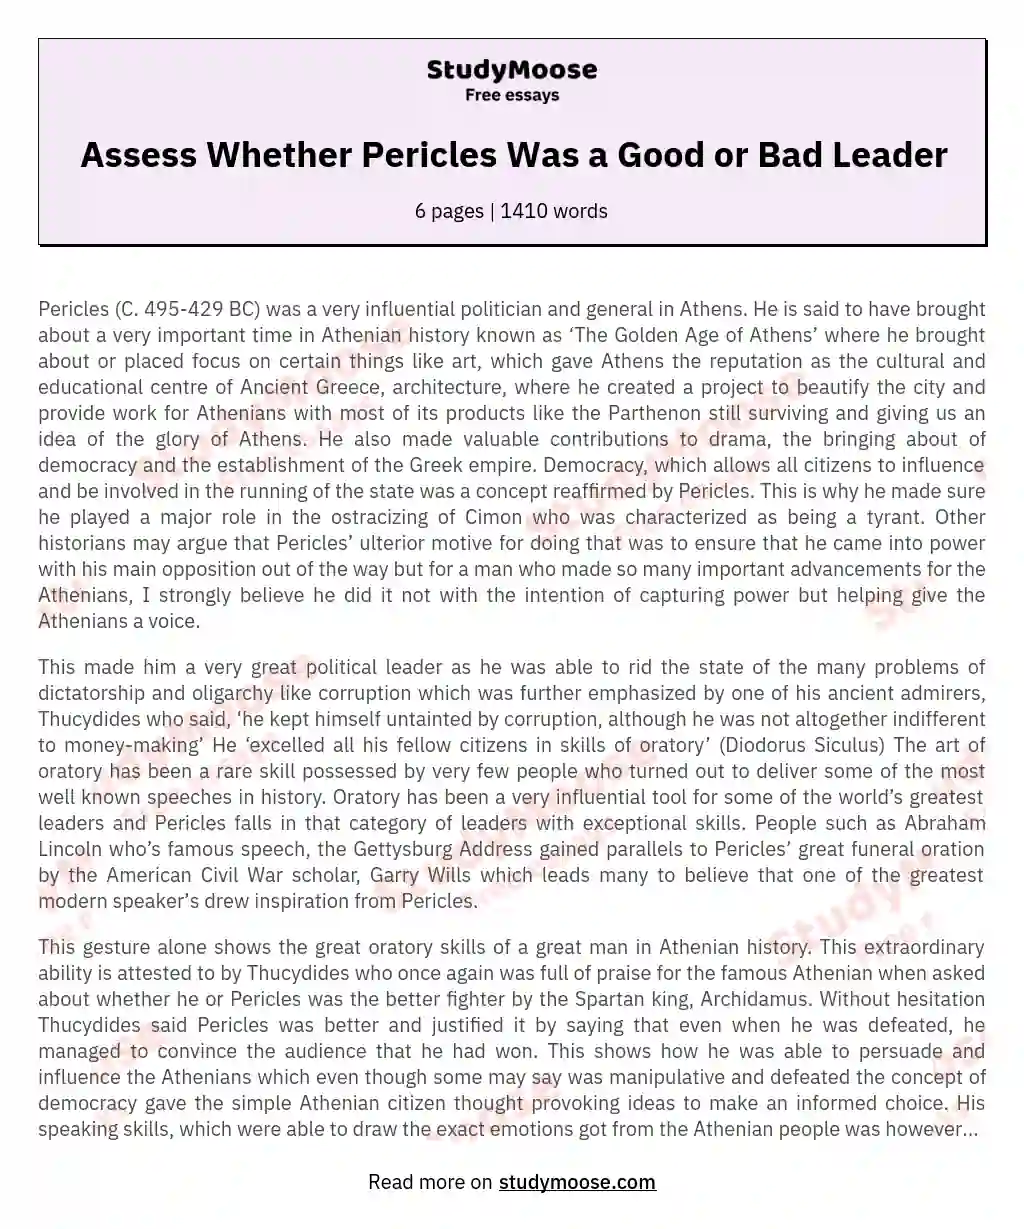 Assess Whether Pericles Was a Good or Bad Leader essay